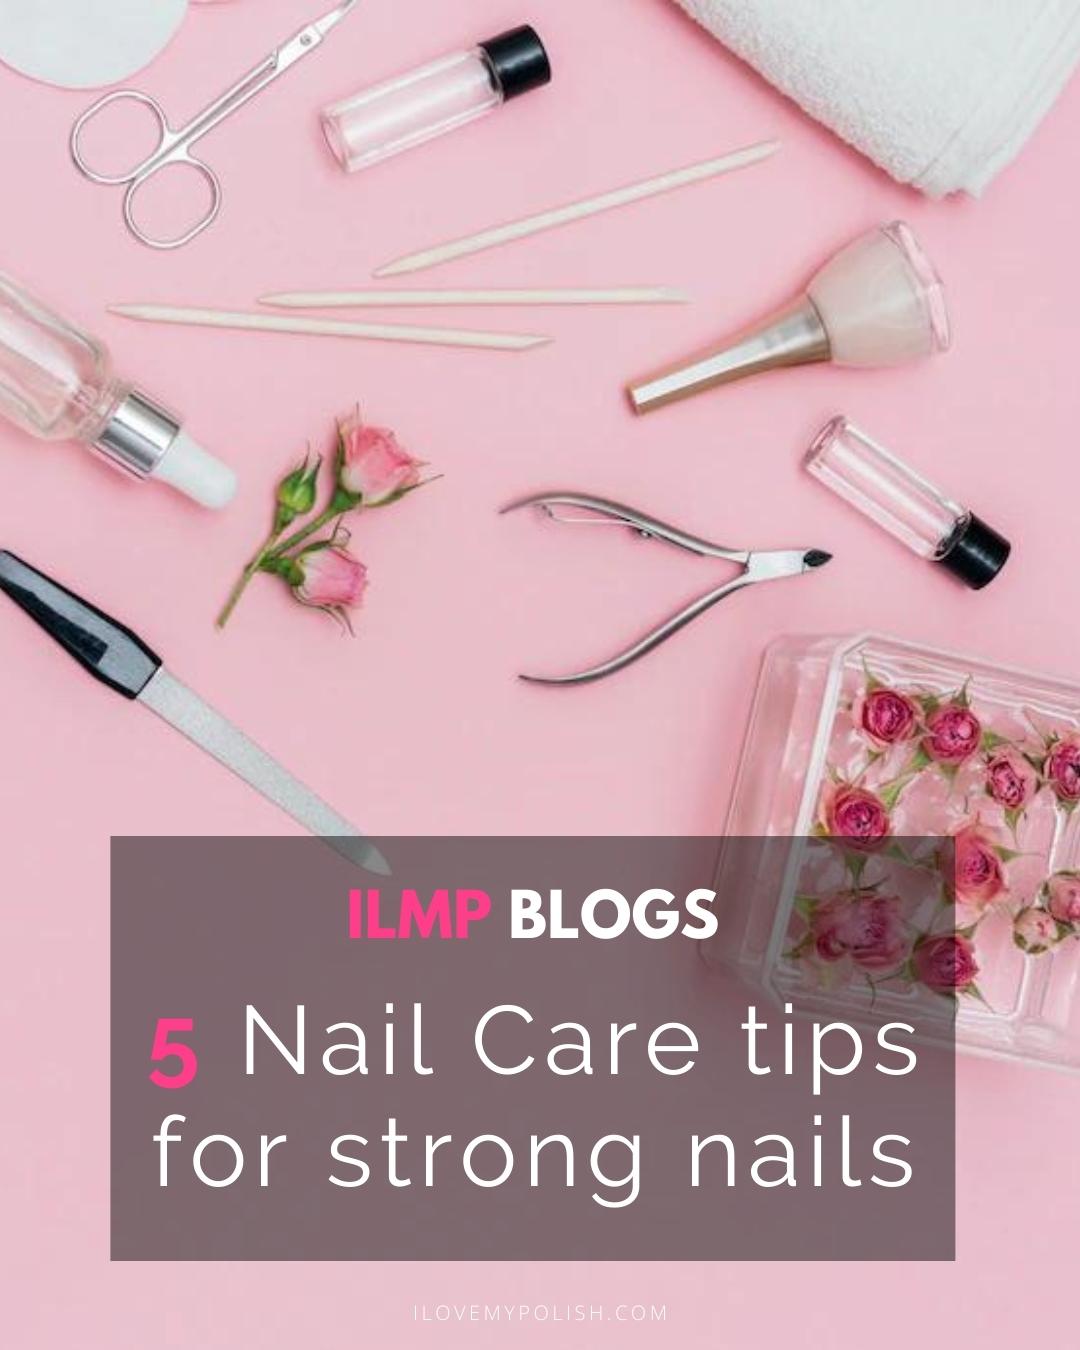 5 Nail care tips for strong nails